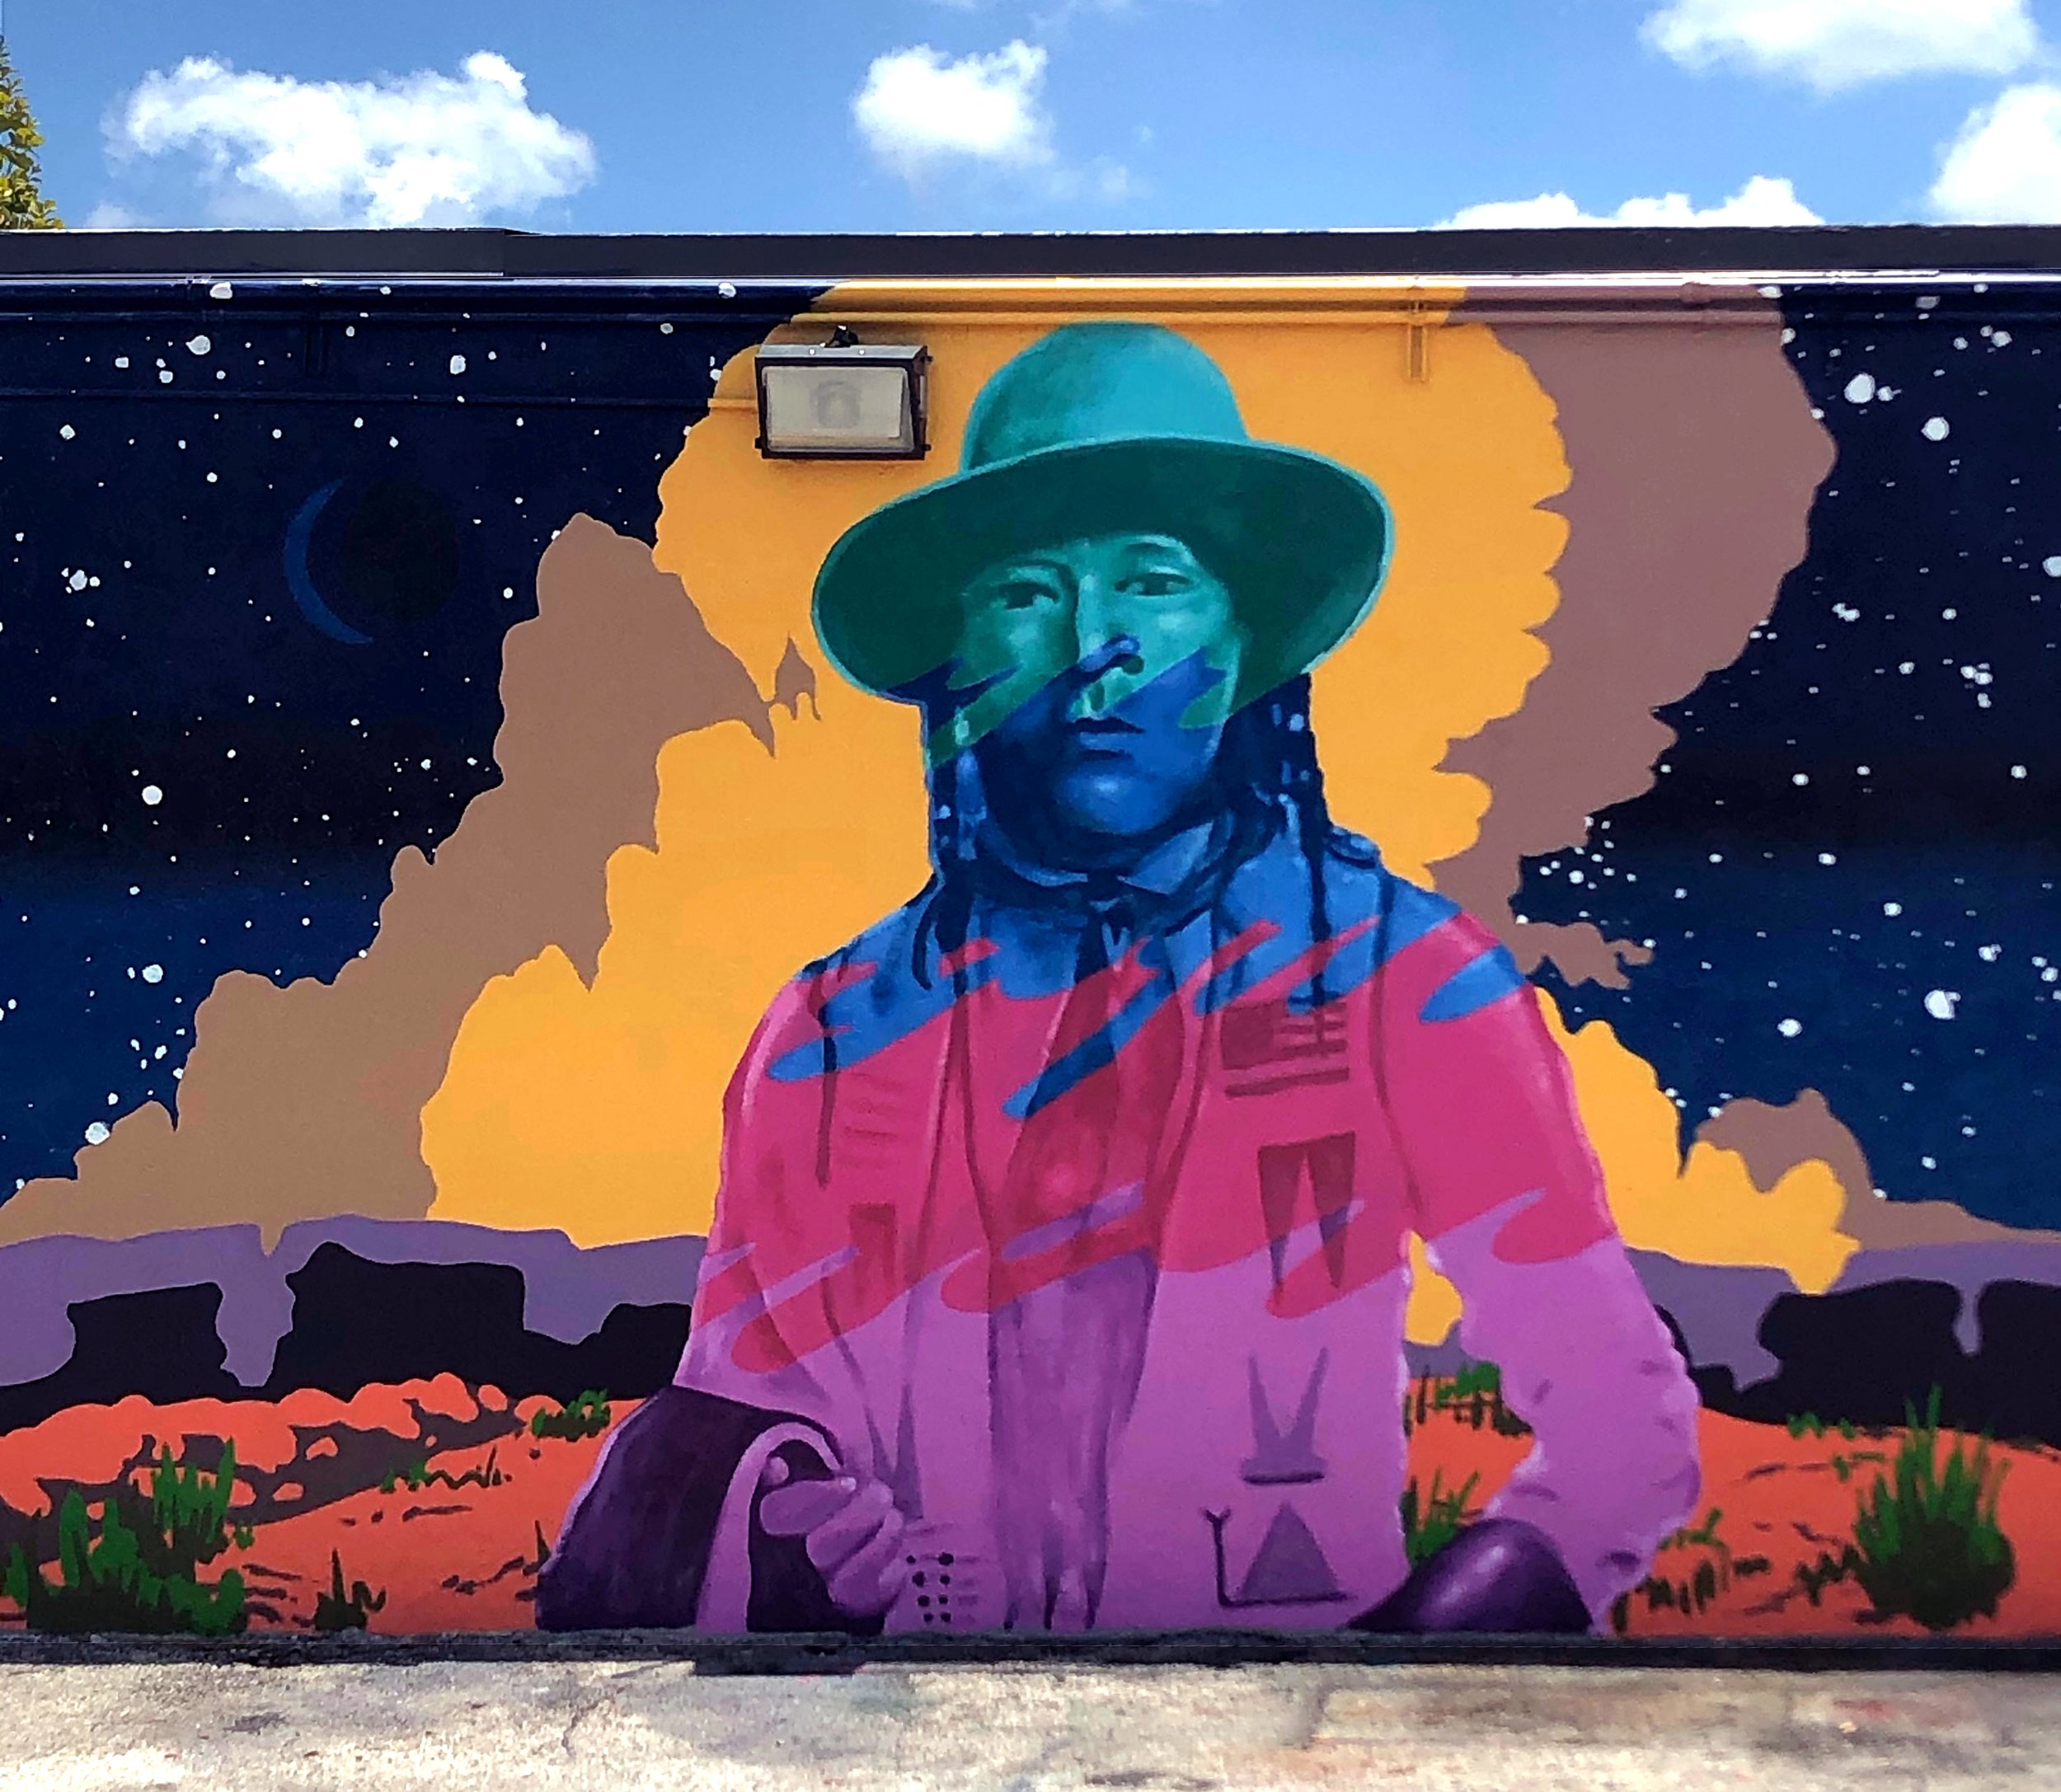   Cherokee Kid  mural commissioned by DNS Property Management Inc. 16’w x 10’h 4350 SW 59th Ave, Davie, FL, 33314. 2021 